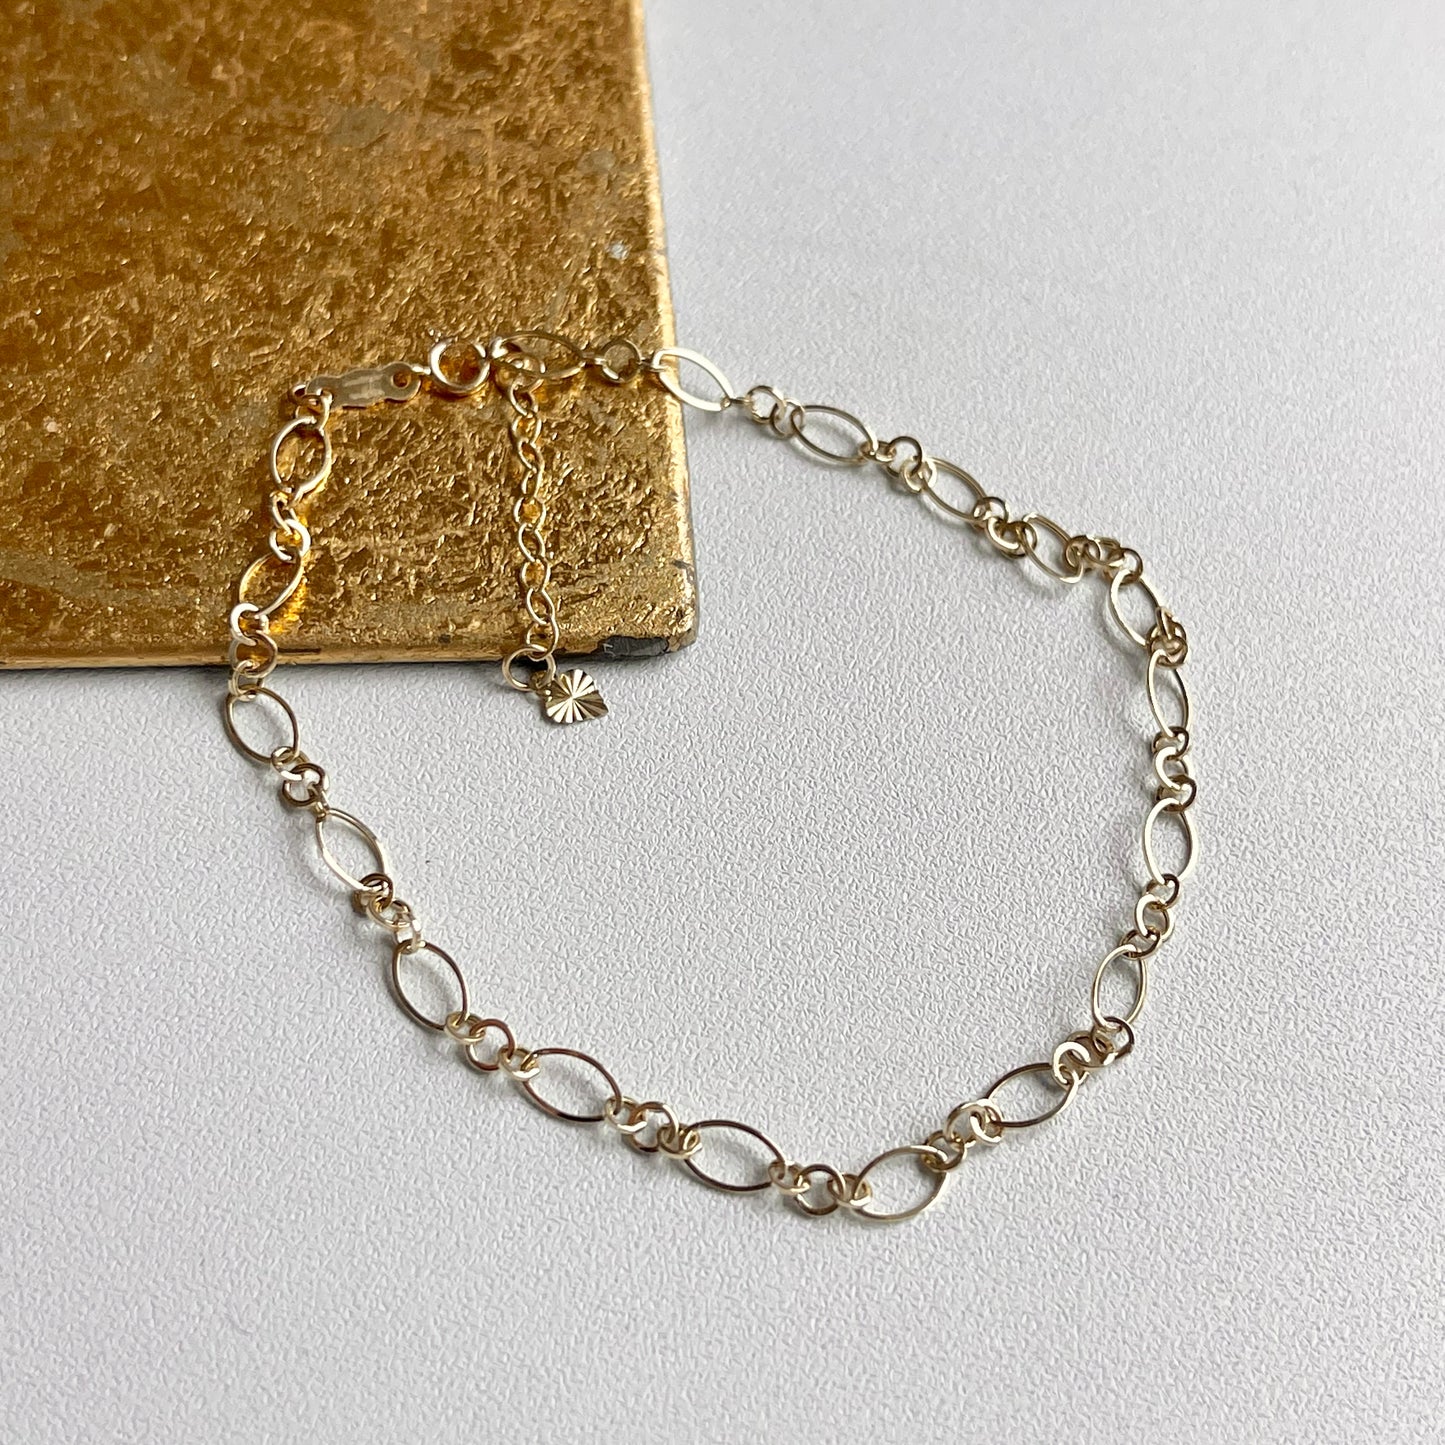 14KT Yellow Gold Oval Chain Link Anklet